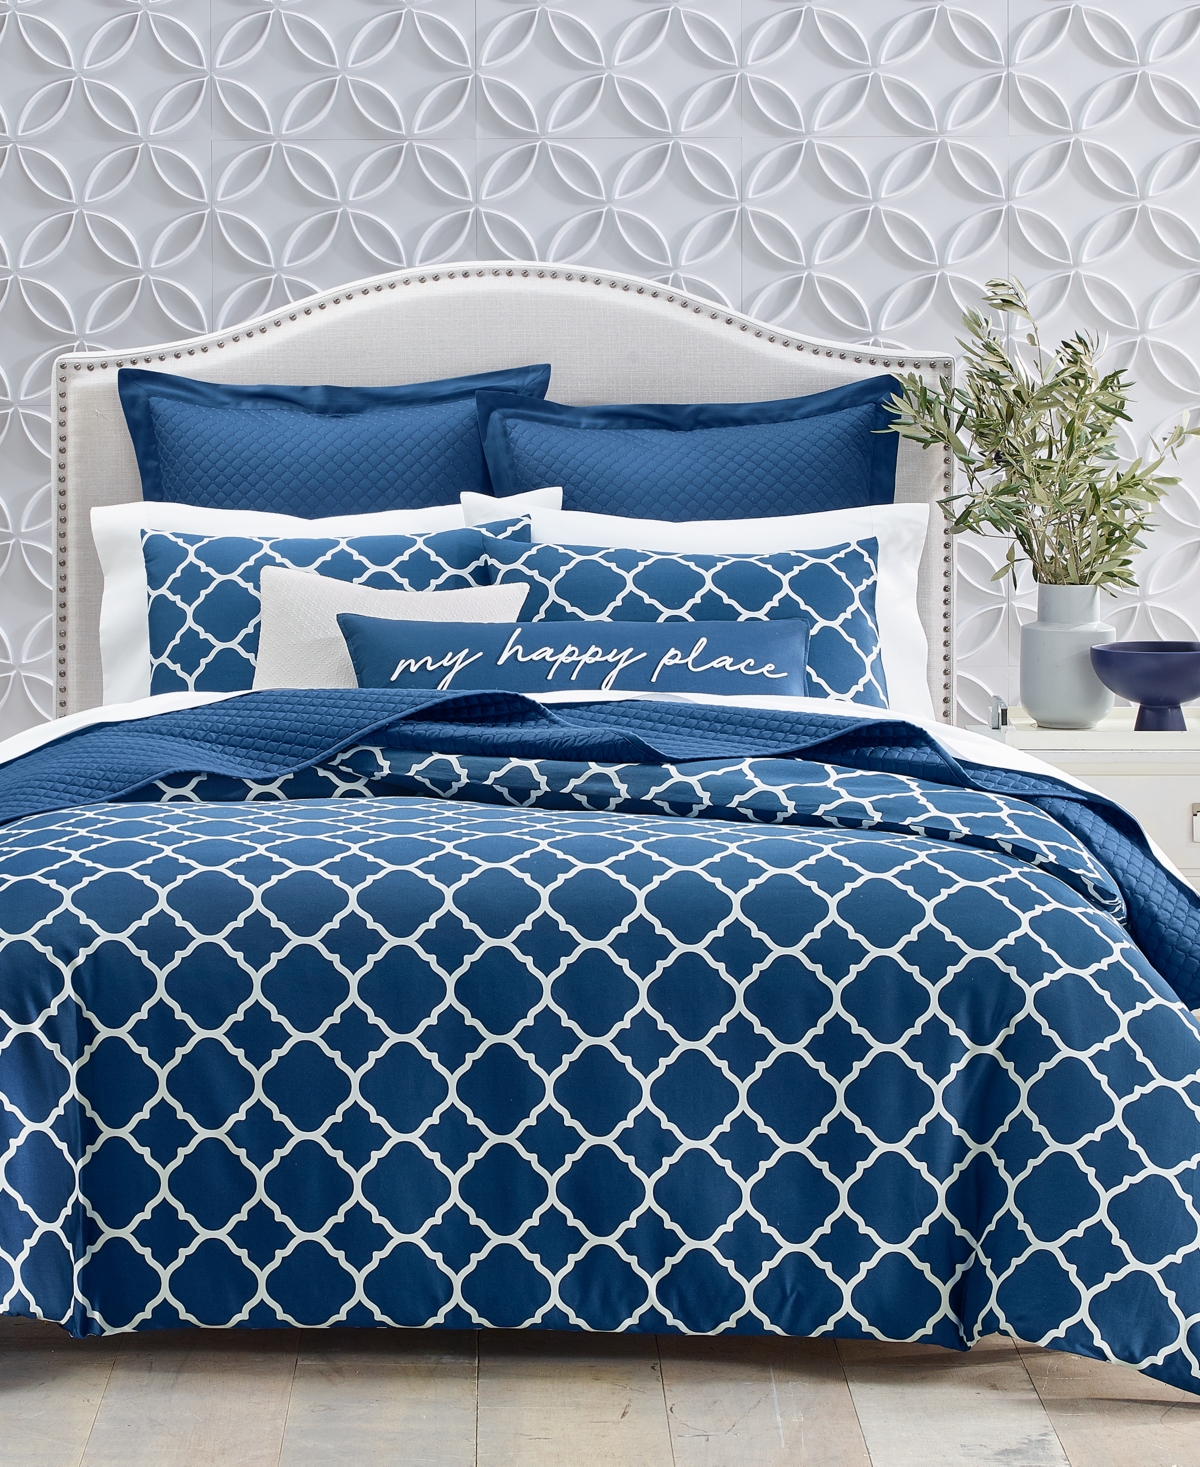 Charter Club Damask Designs Geometric Dove 3-pc. Comforter Set, Full/queen, Created For Macy's In Navy Peony